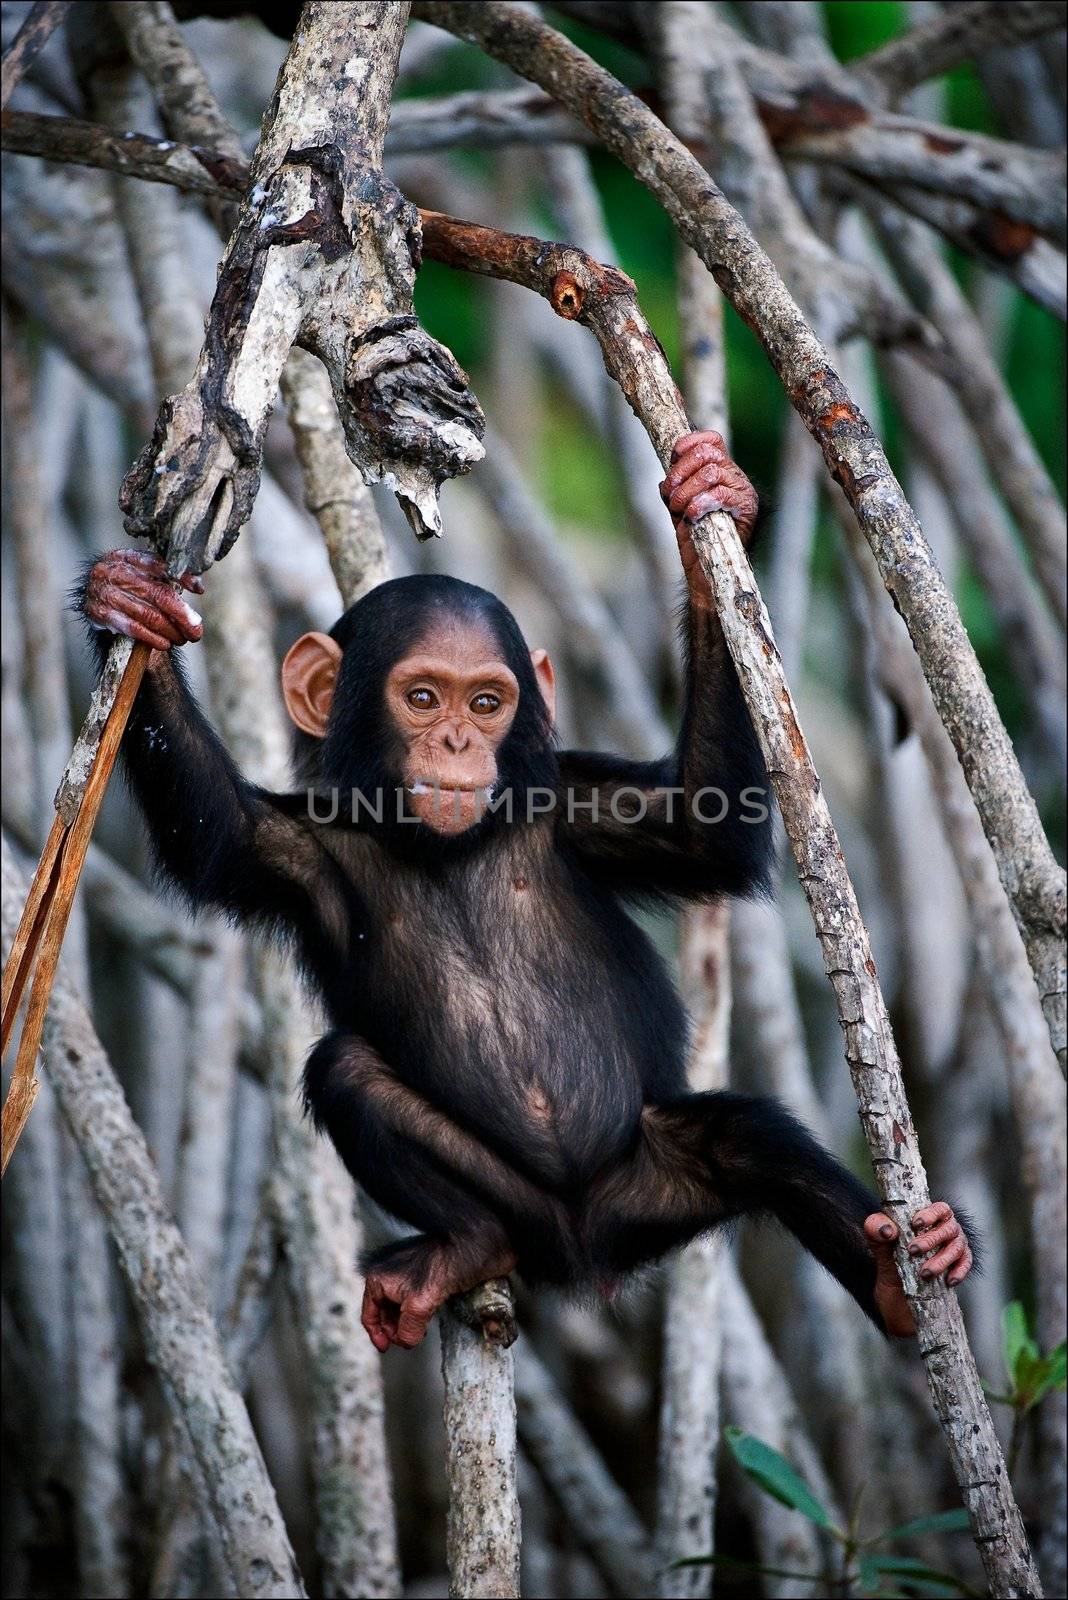 The kid of a chimpanzee. The cub of a chimpanzee frolics on roots mangrove thickets.